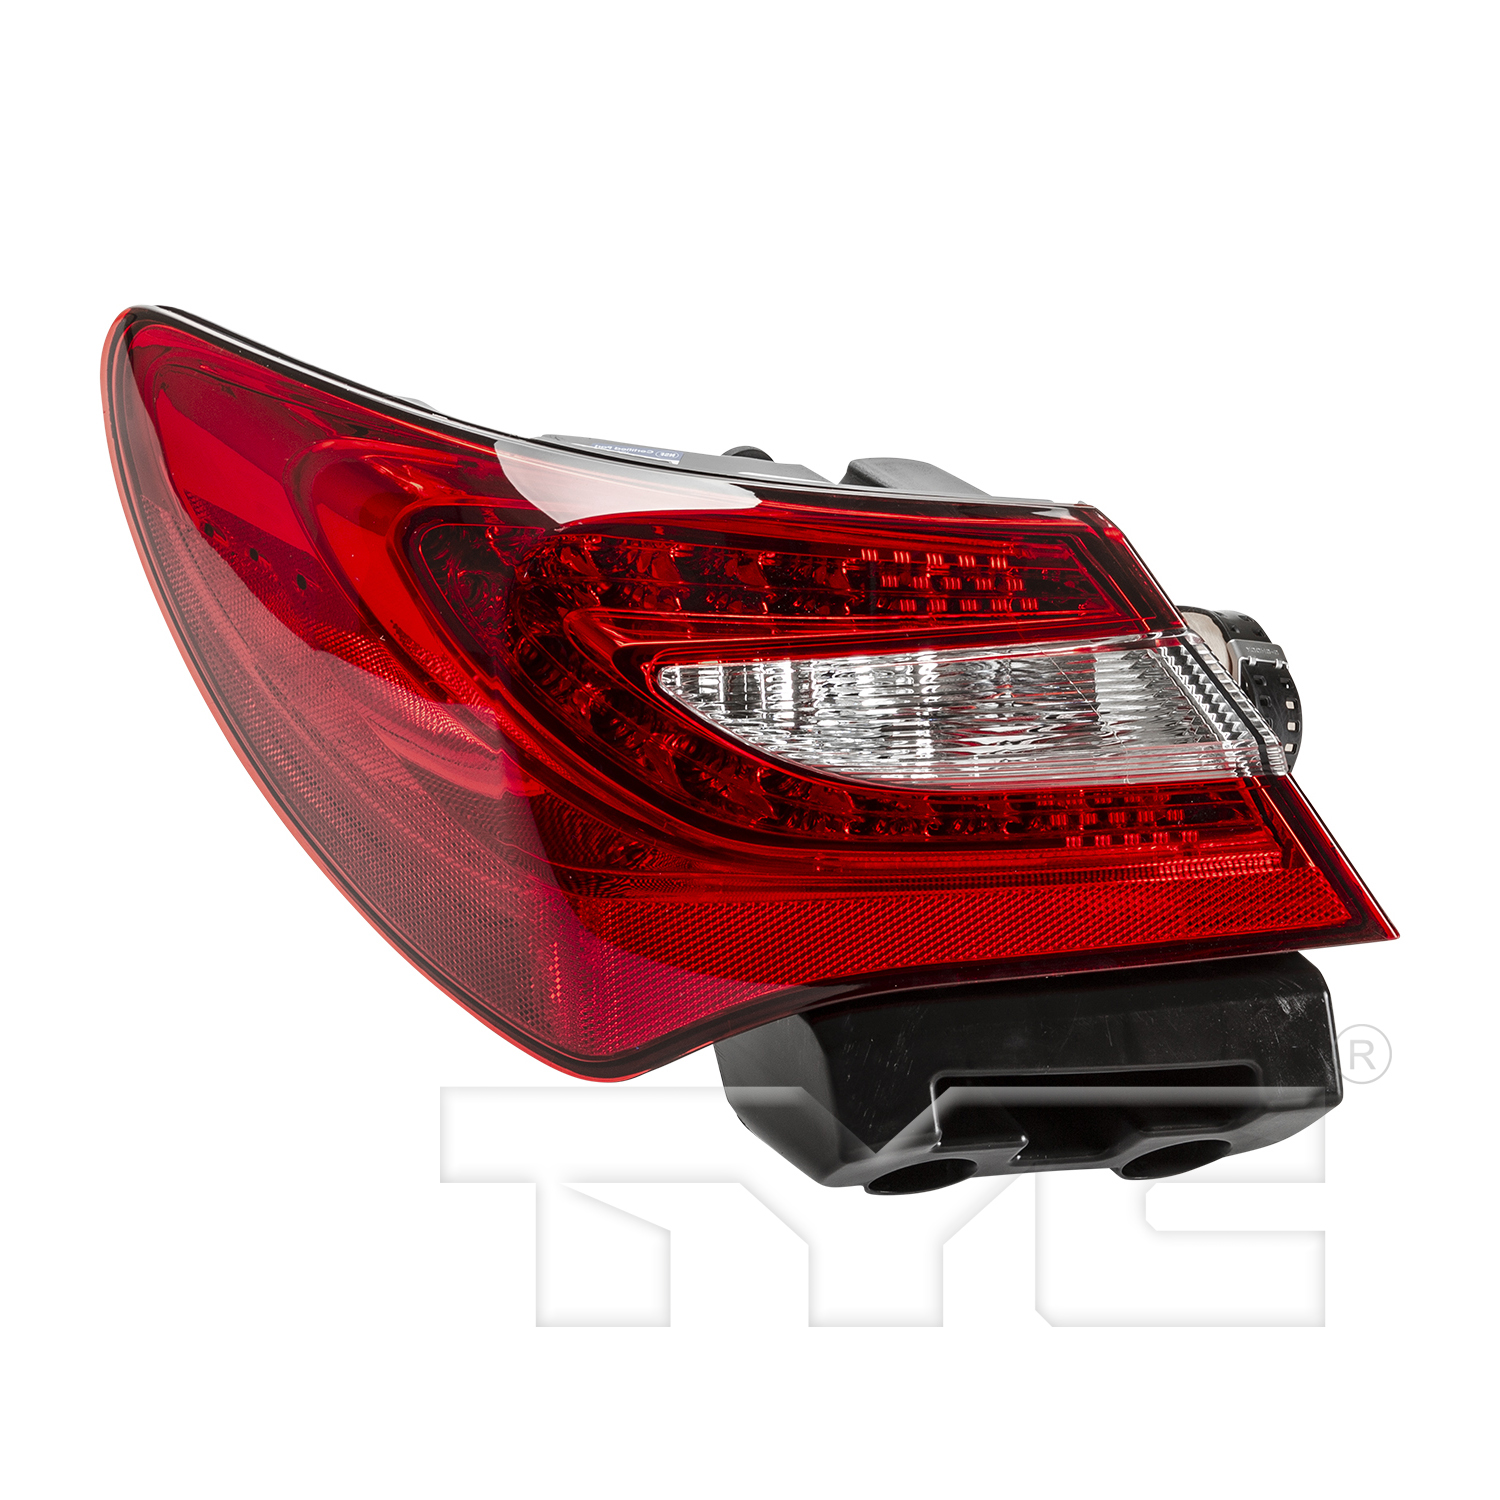 Aftermarket TAILLIGHTS for CHRYSLER - 200, 200,11-14,LT Taillamp lens/housing